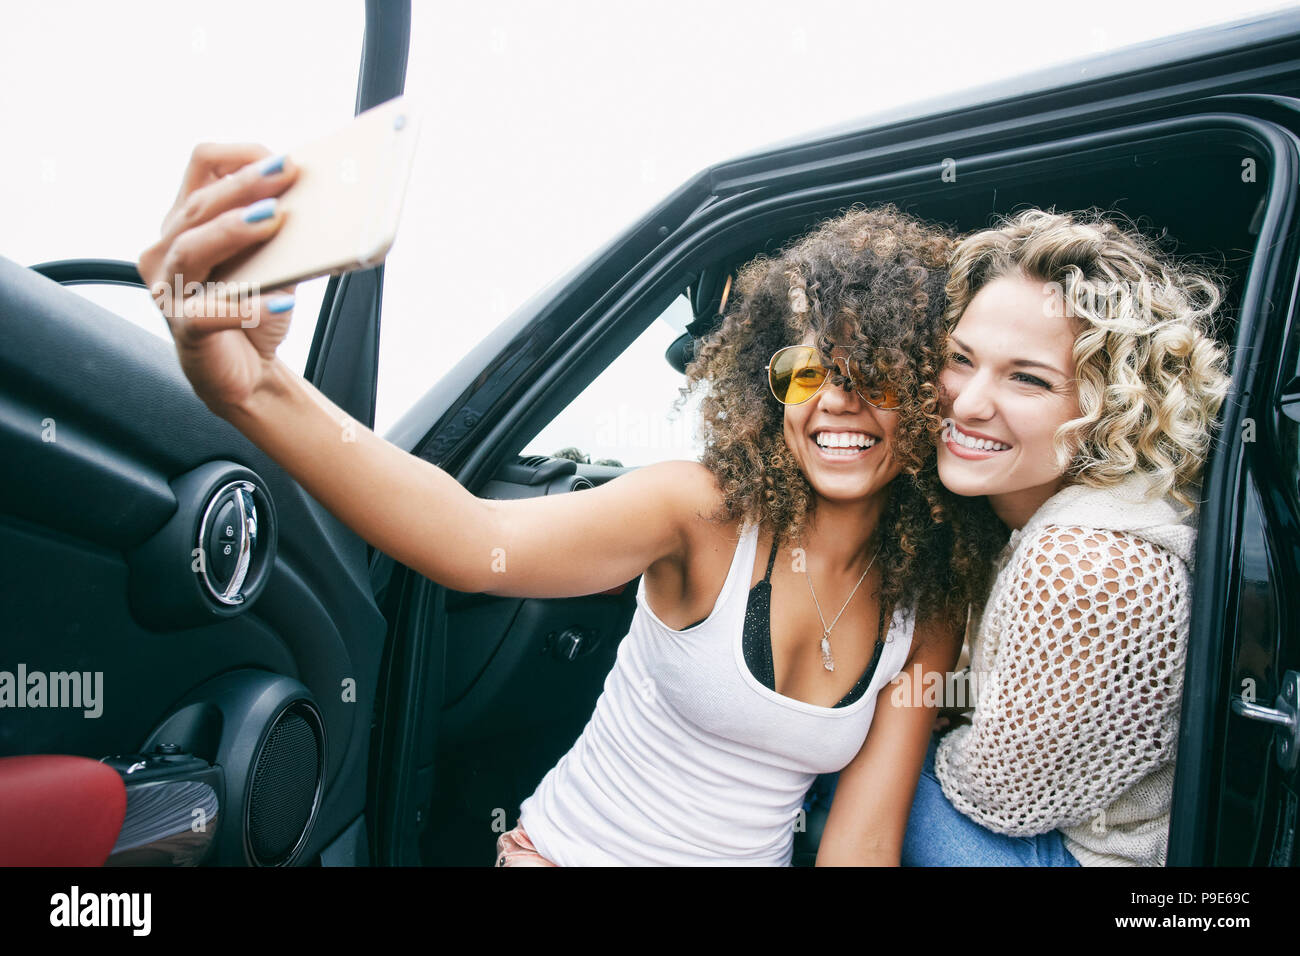 Portrait of two smiling young women with blond and brown curly hair sitting in car, taking selfie with mobile phone. Stock Photo